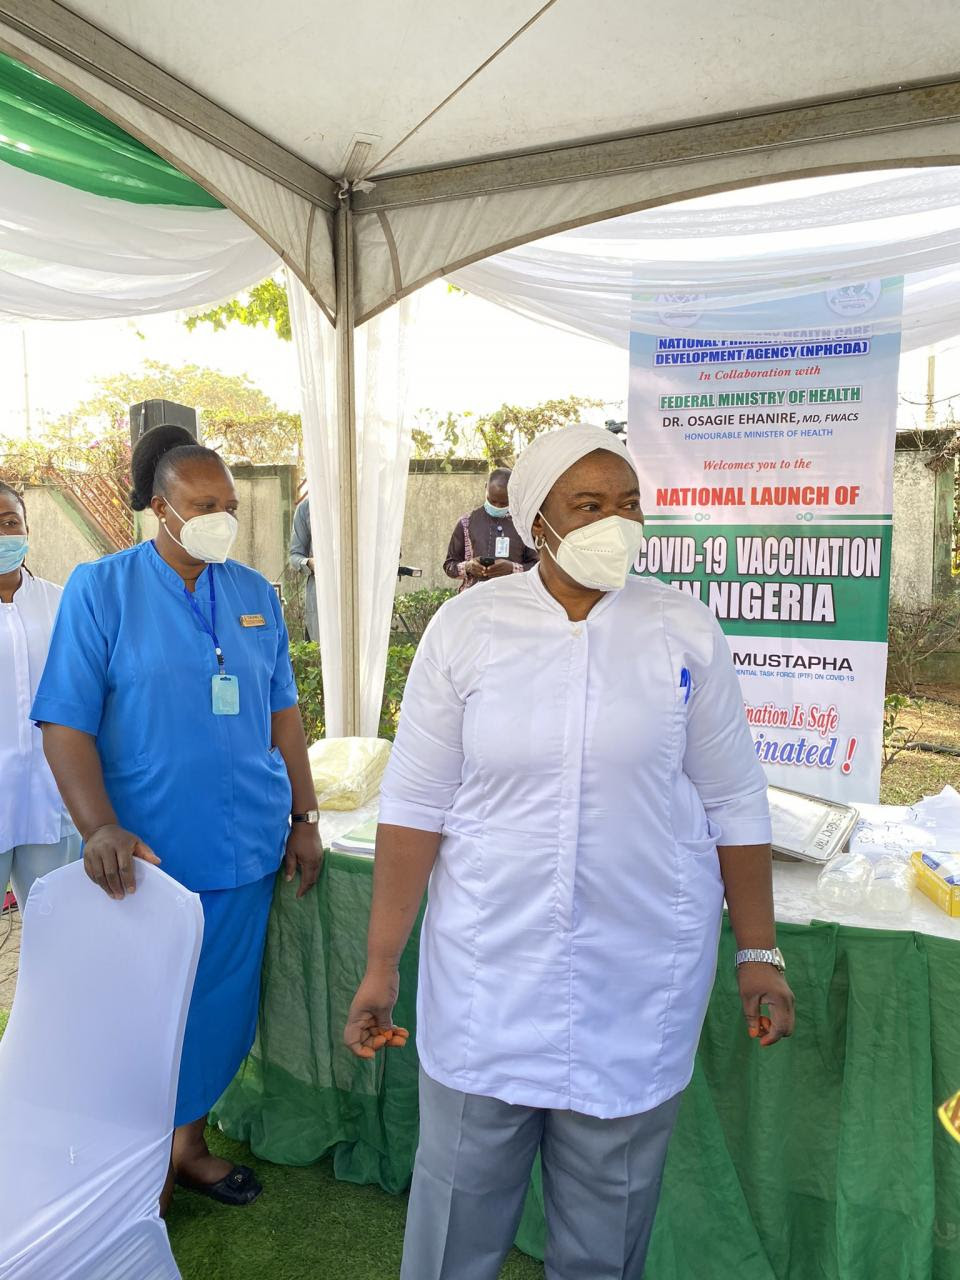 Nigeria begins COVID19 vaccination as health workers take their first shots in Abuja (photos)